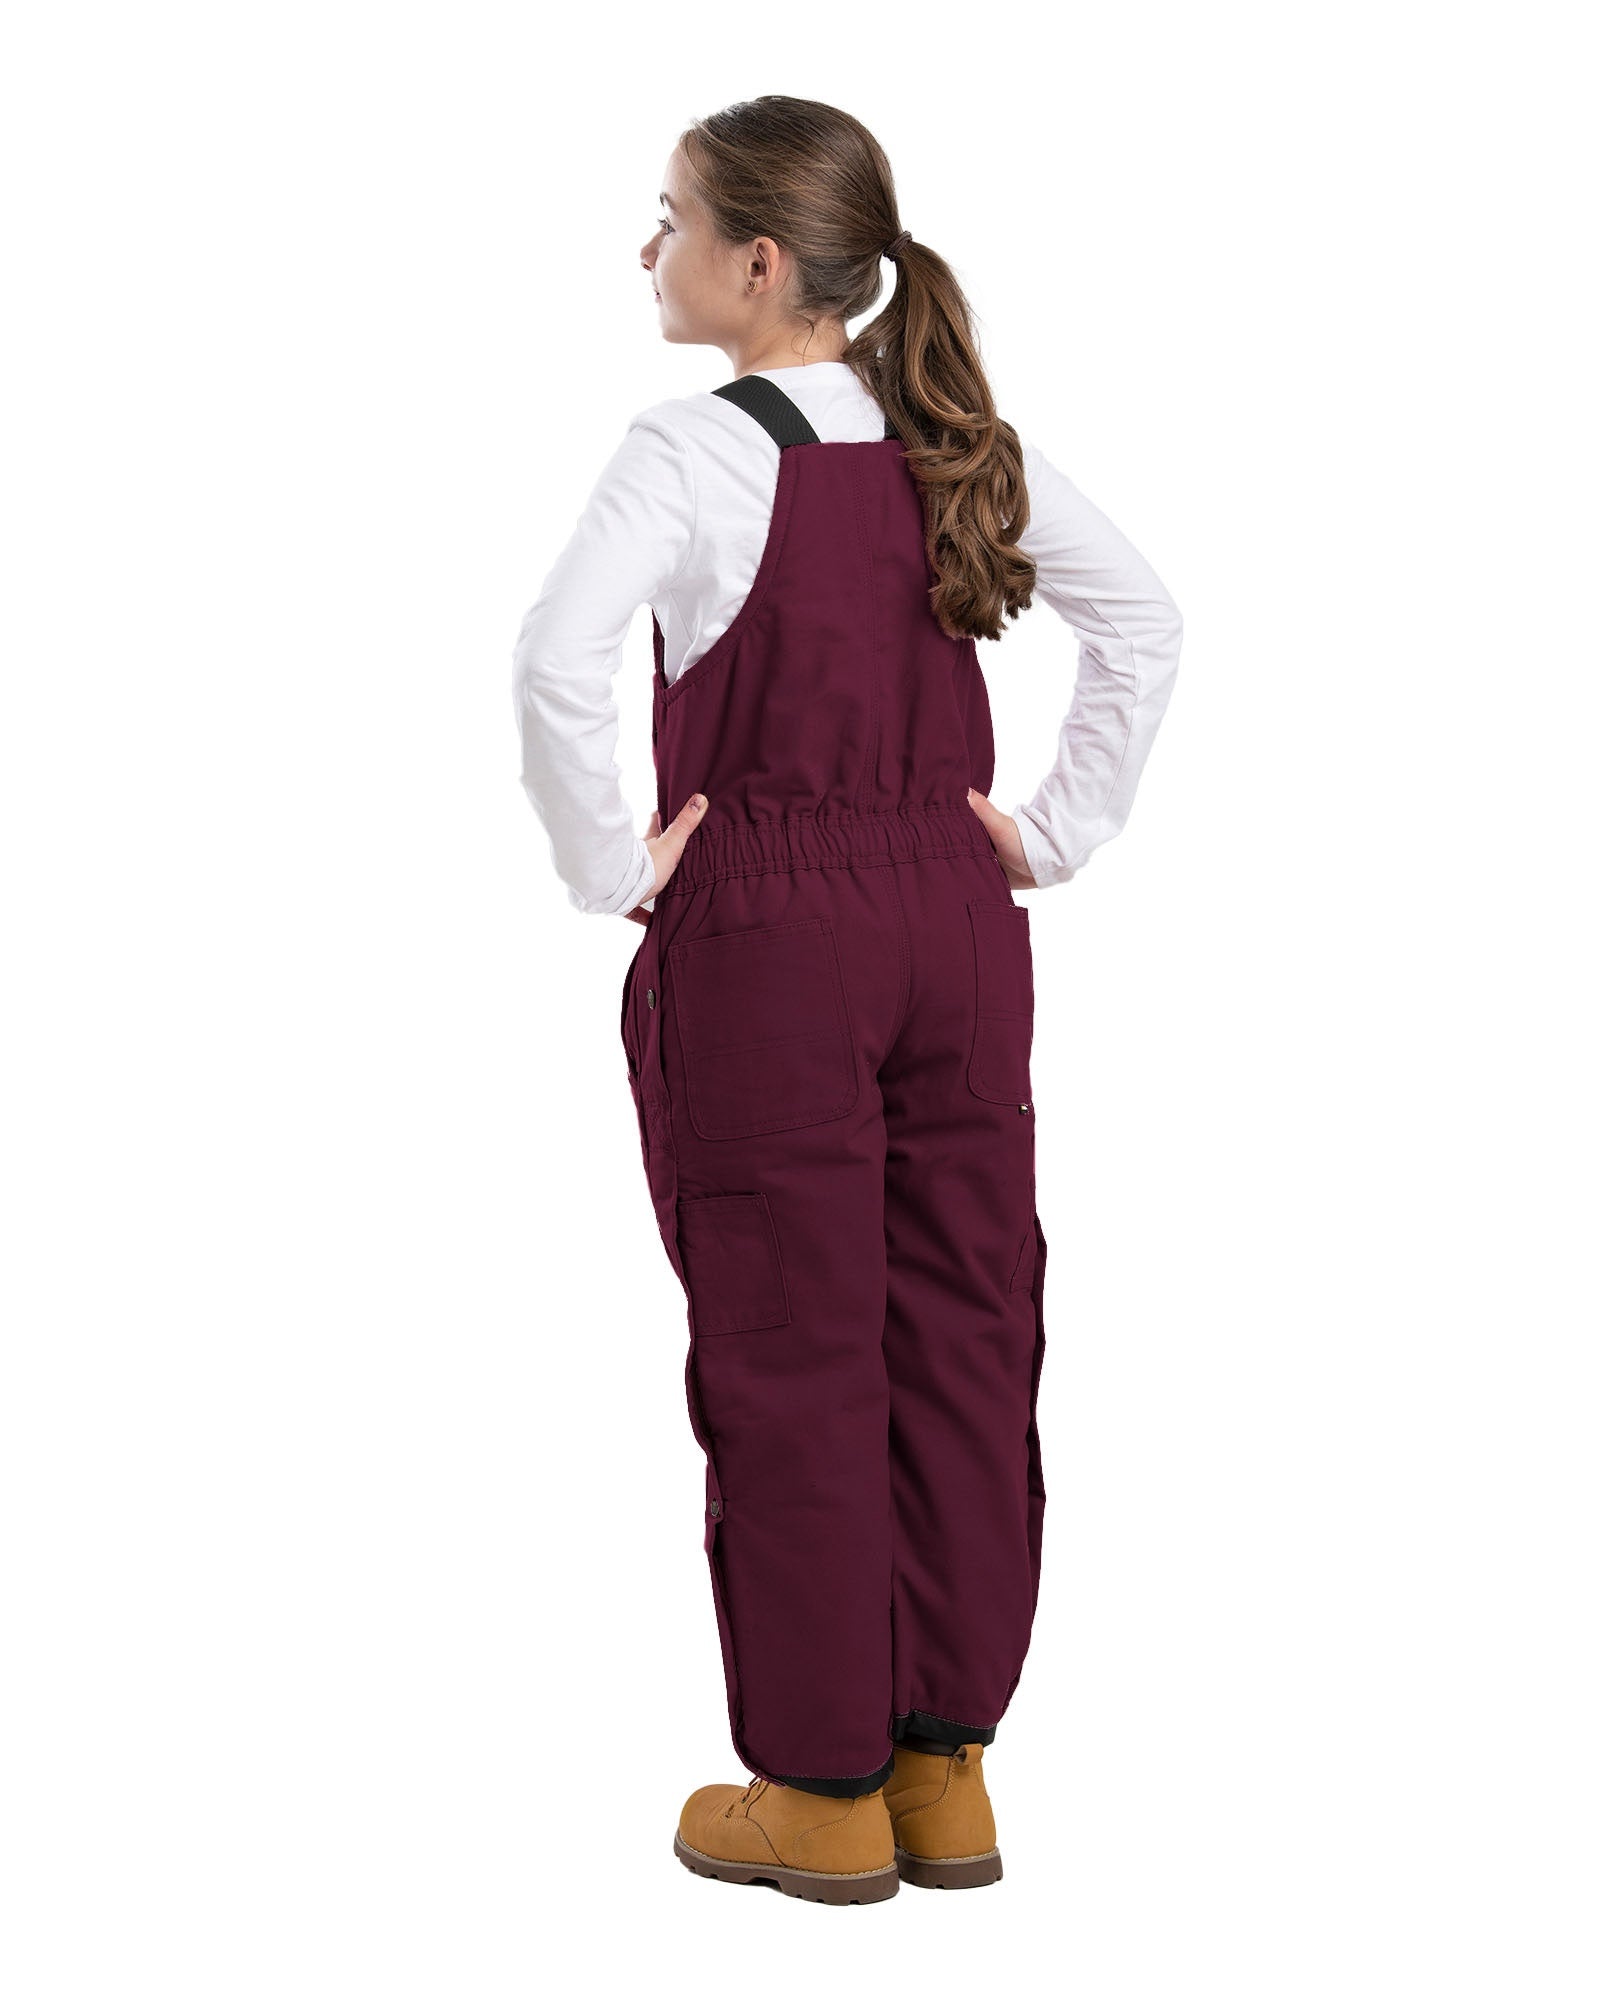 BB21PLM Youth Softstone Insulated Bib Overall